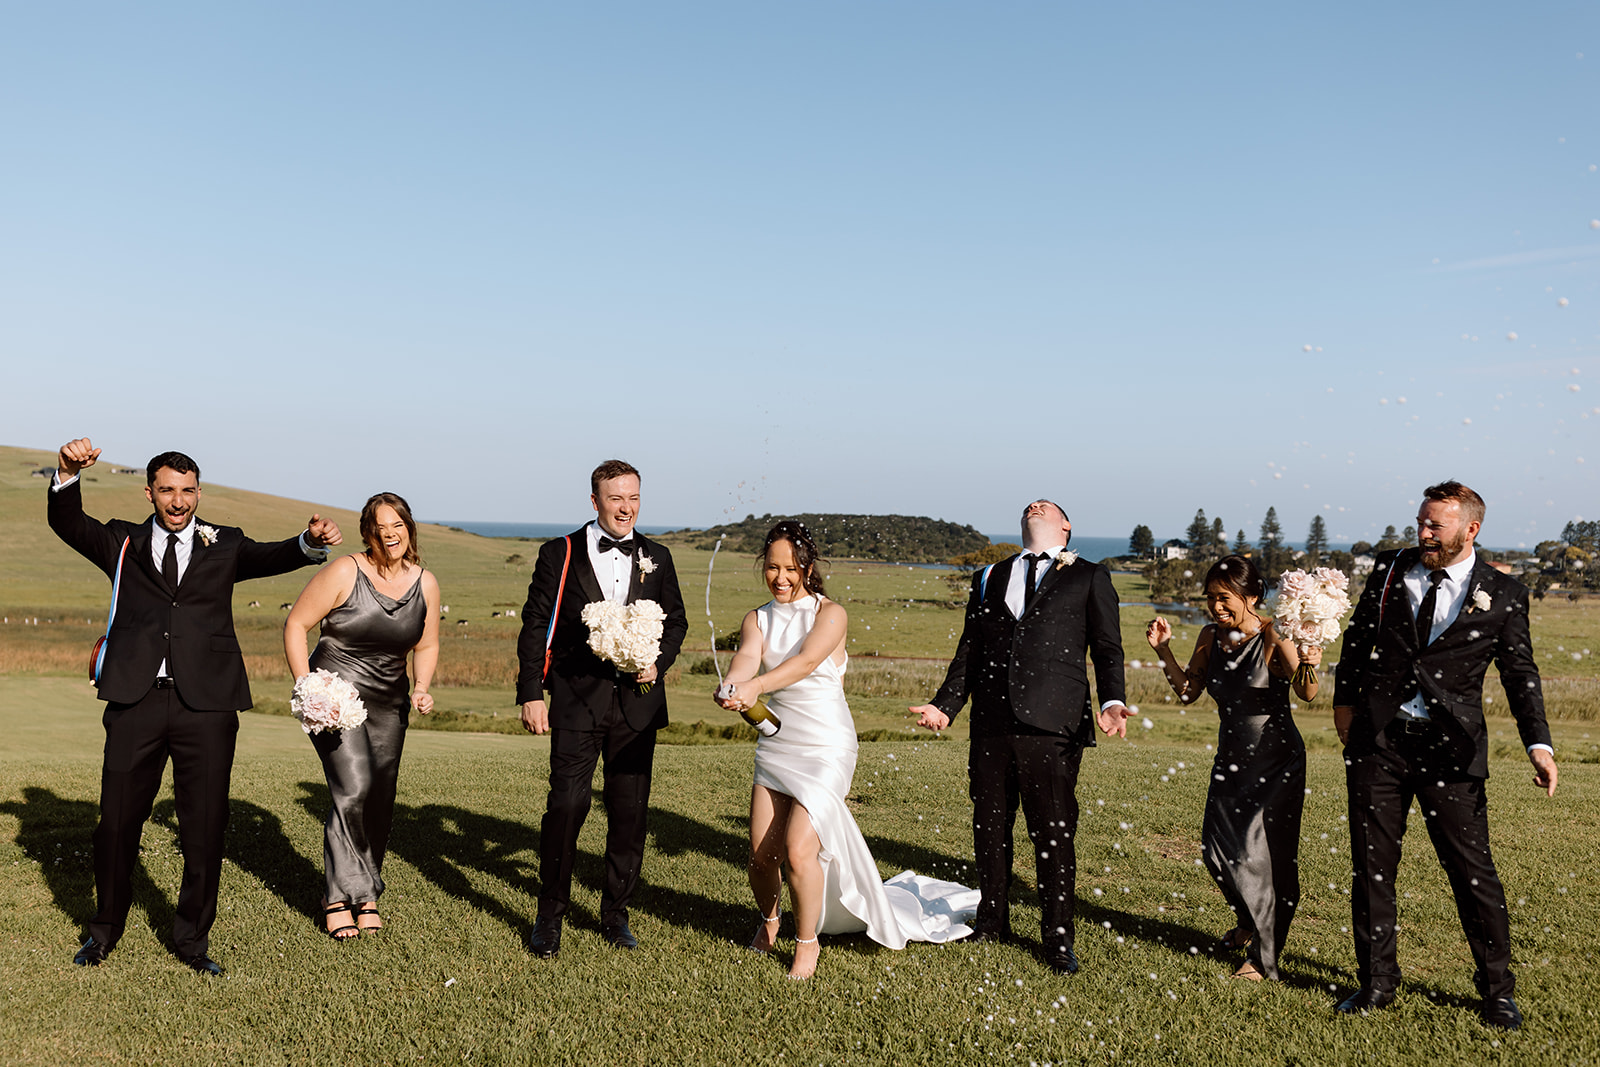 Bridal party champagne spray at the wedding in the South Coast Seacliff House